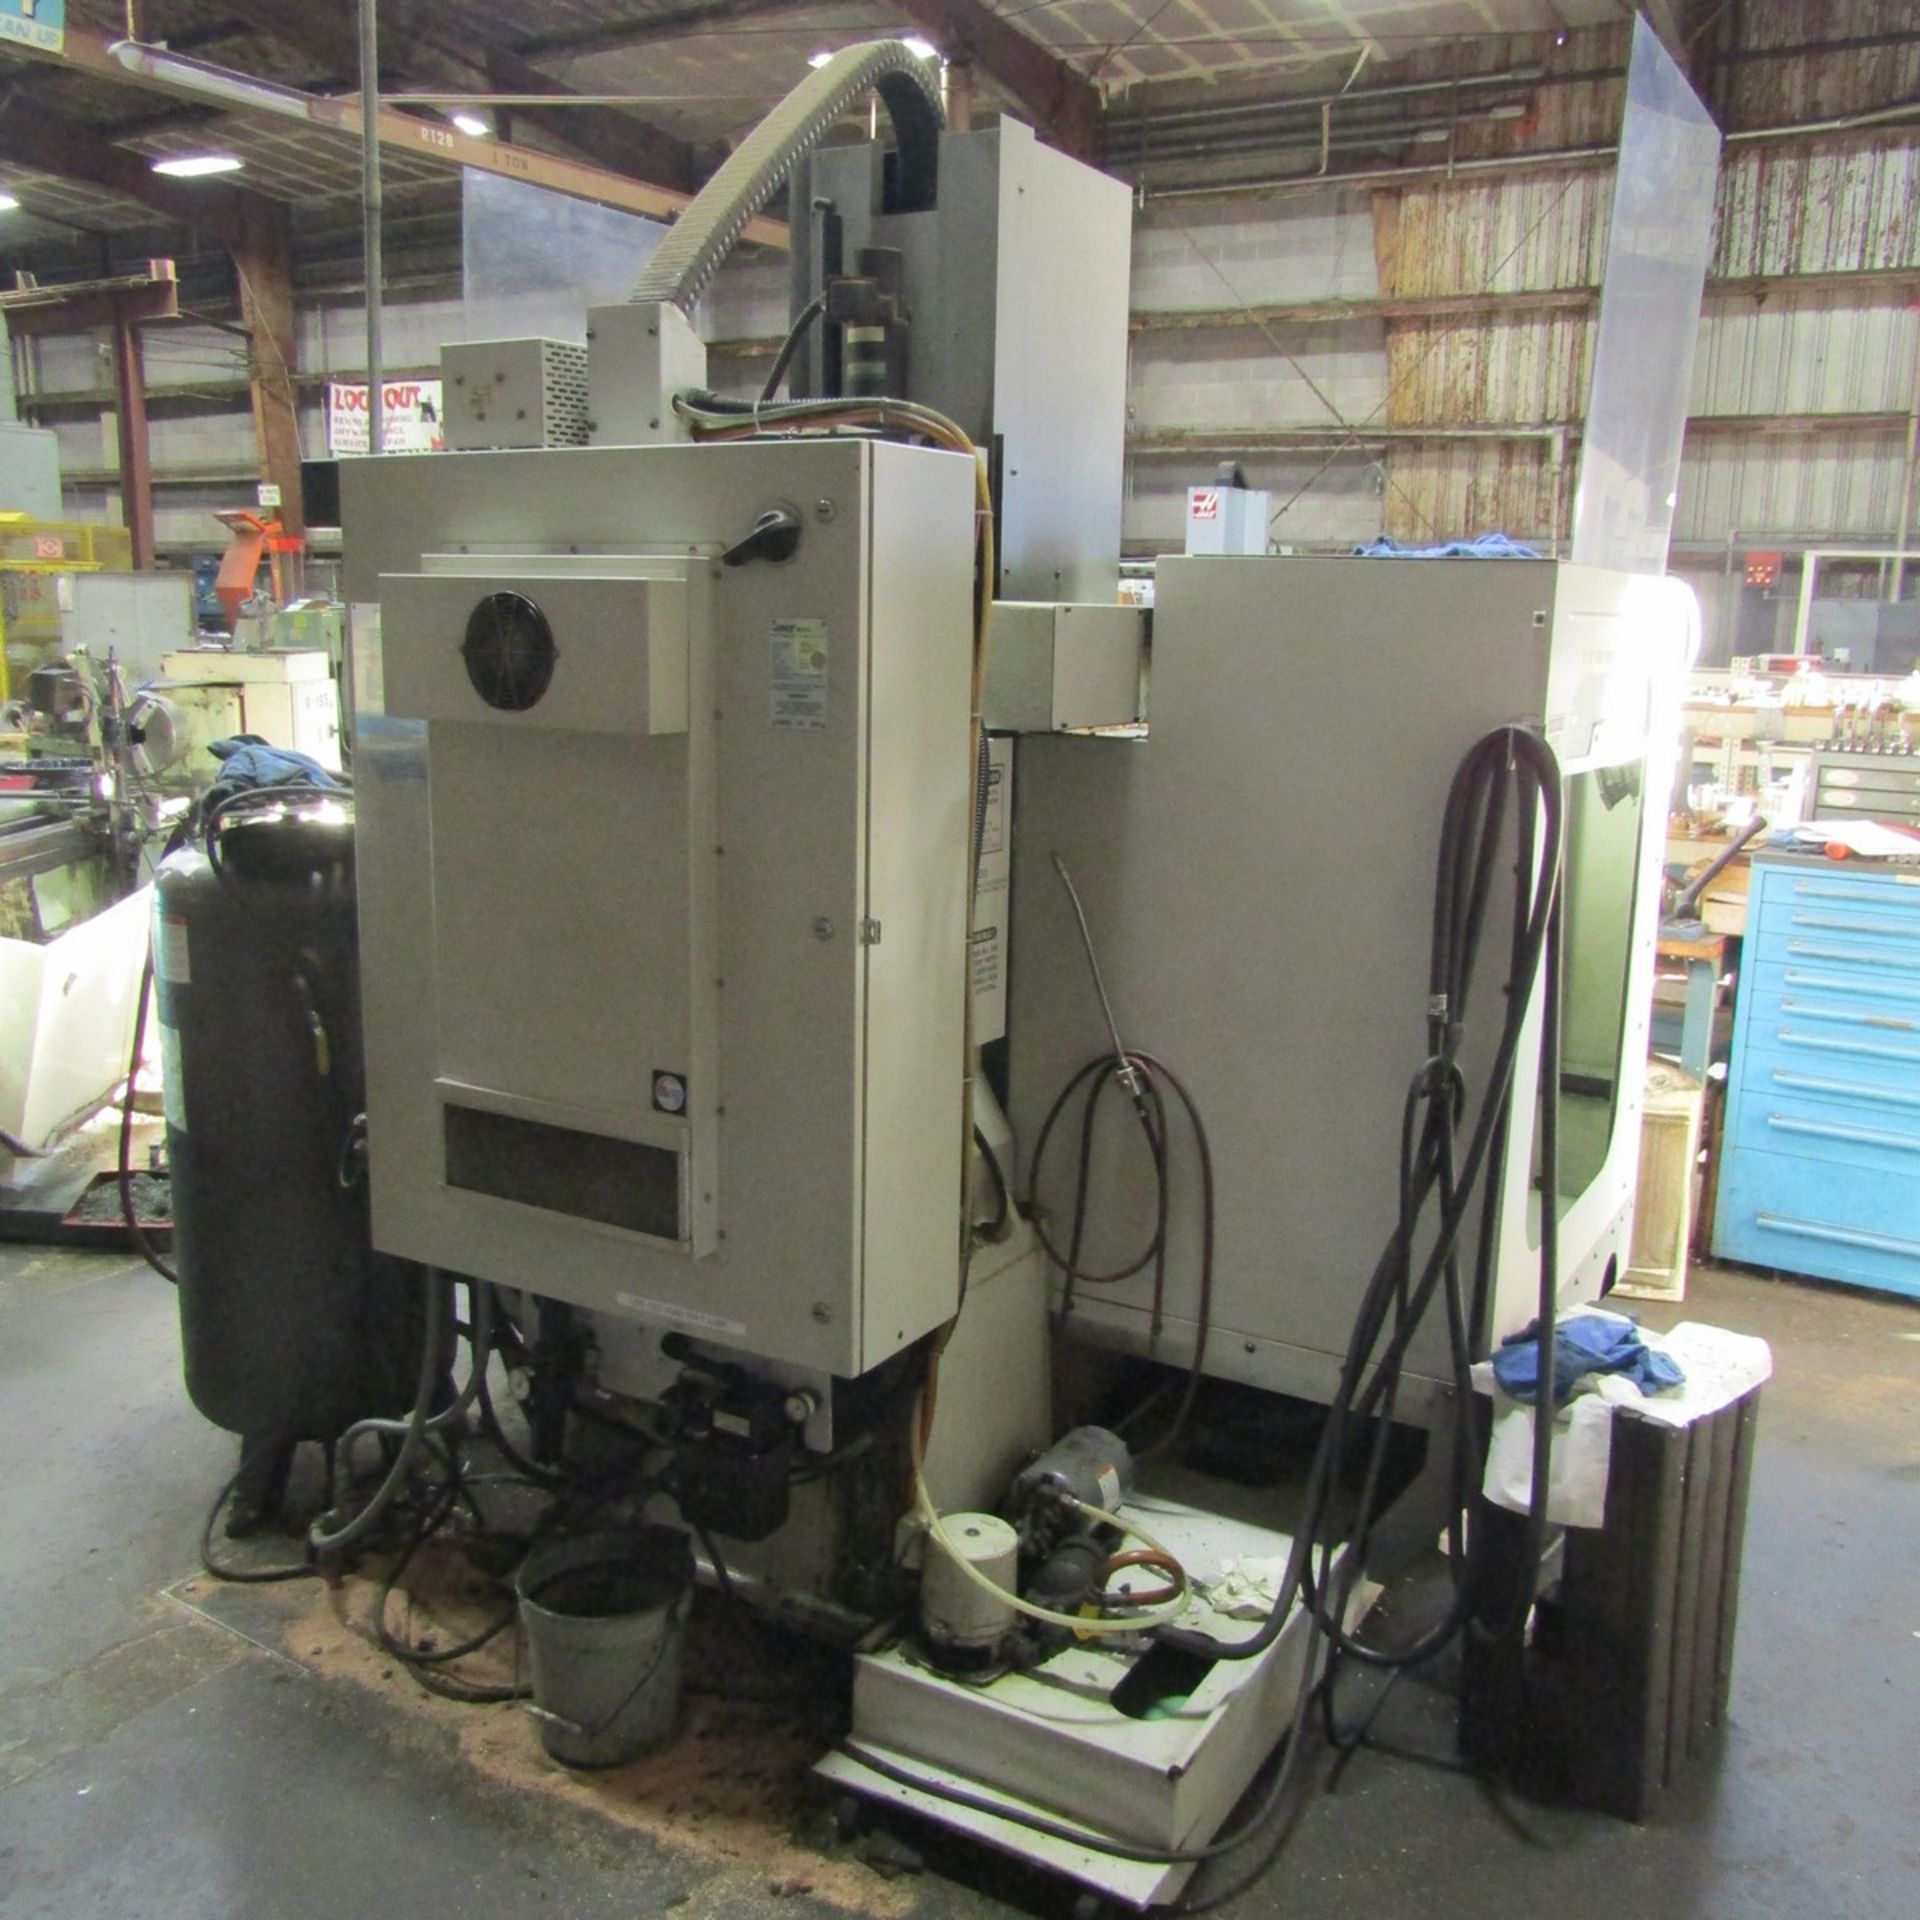 1995 Haas, Mdl: VF-1 Vertical Machining Center 20 ATC, 14" x 26" T-Slotted Table, 8" Kurt II Machine - Image 7 of 8